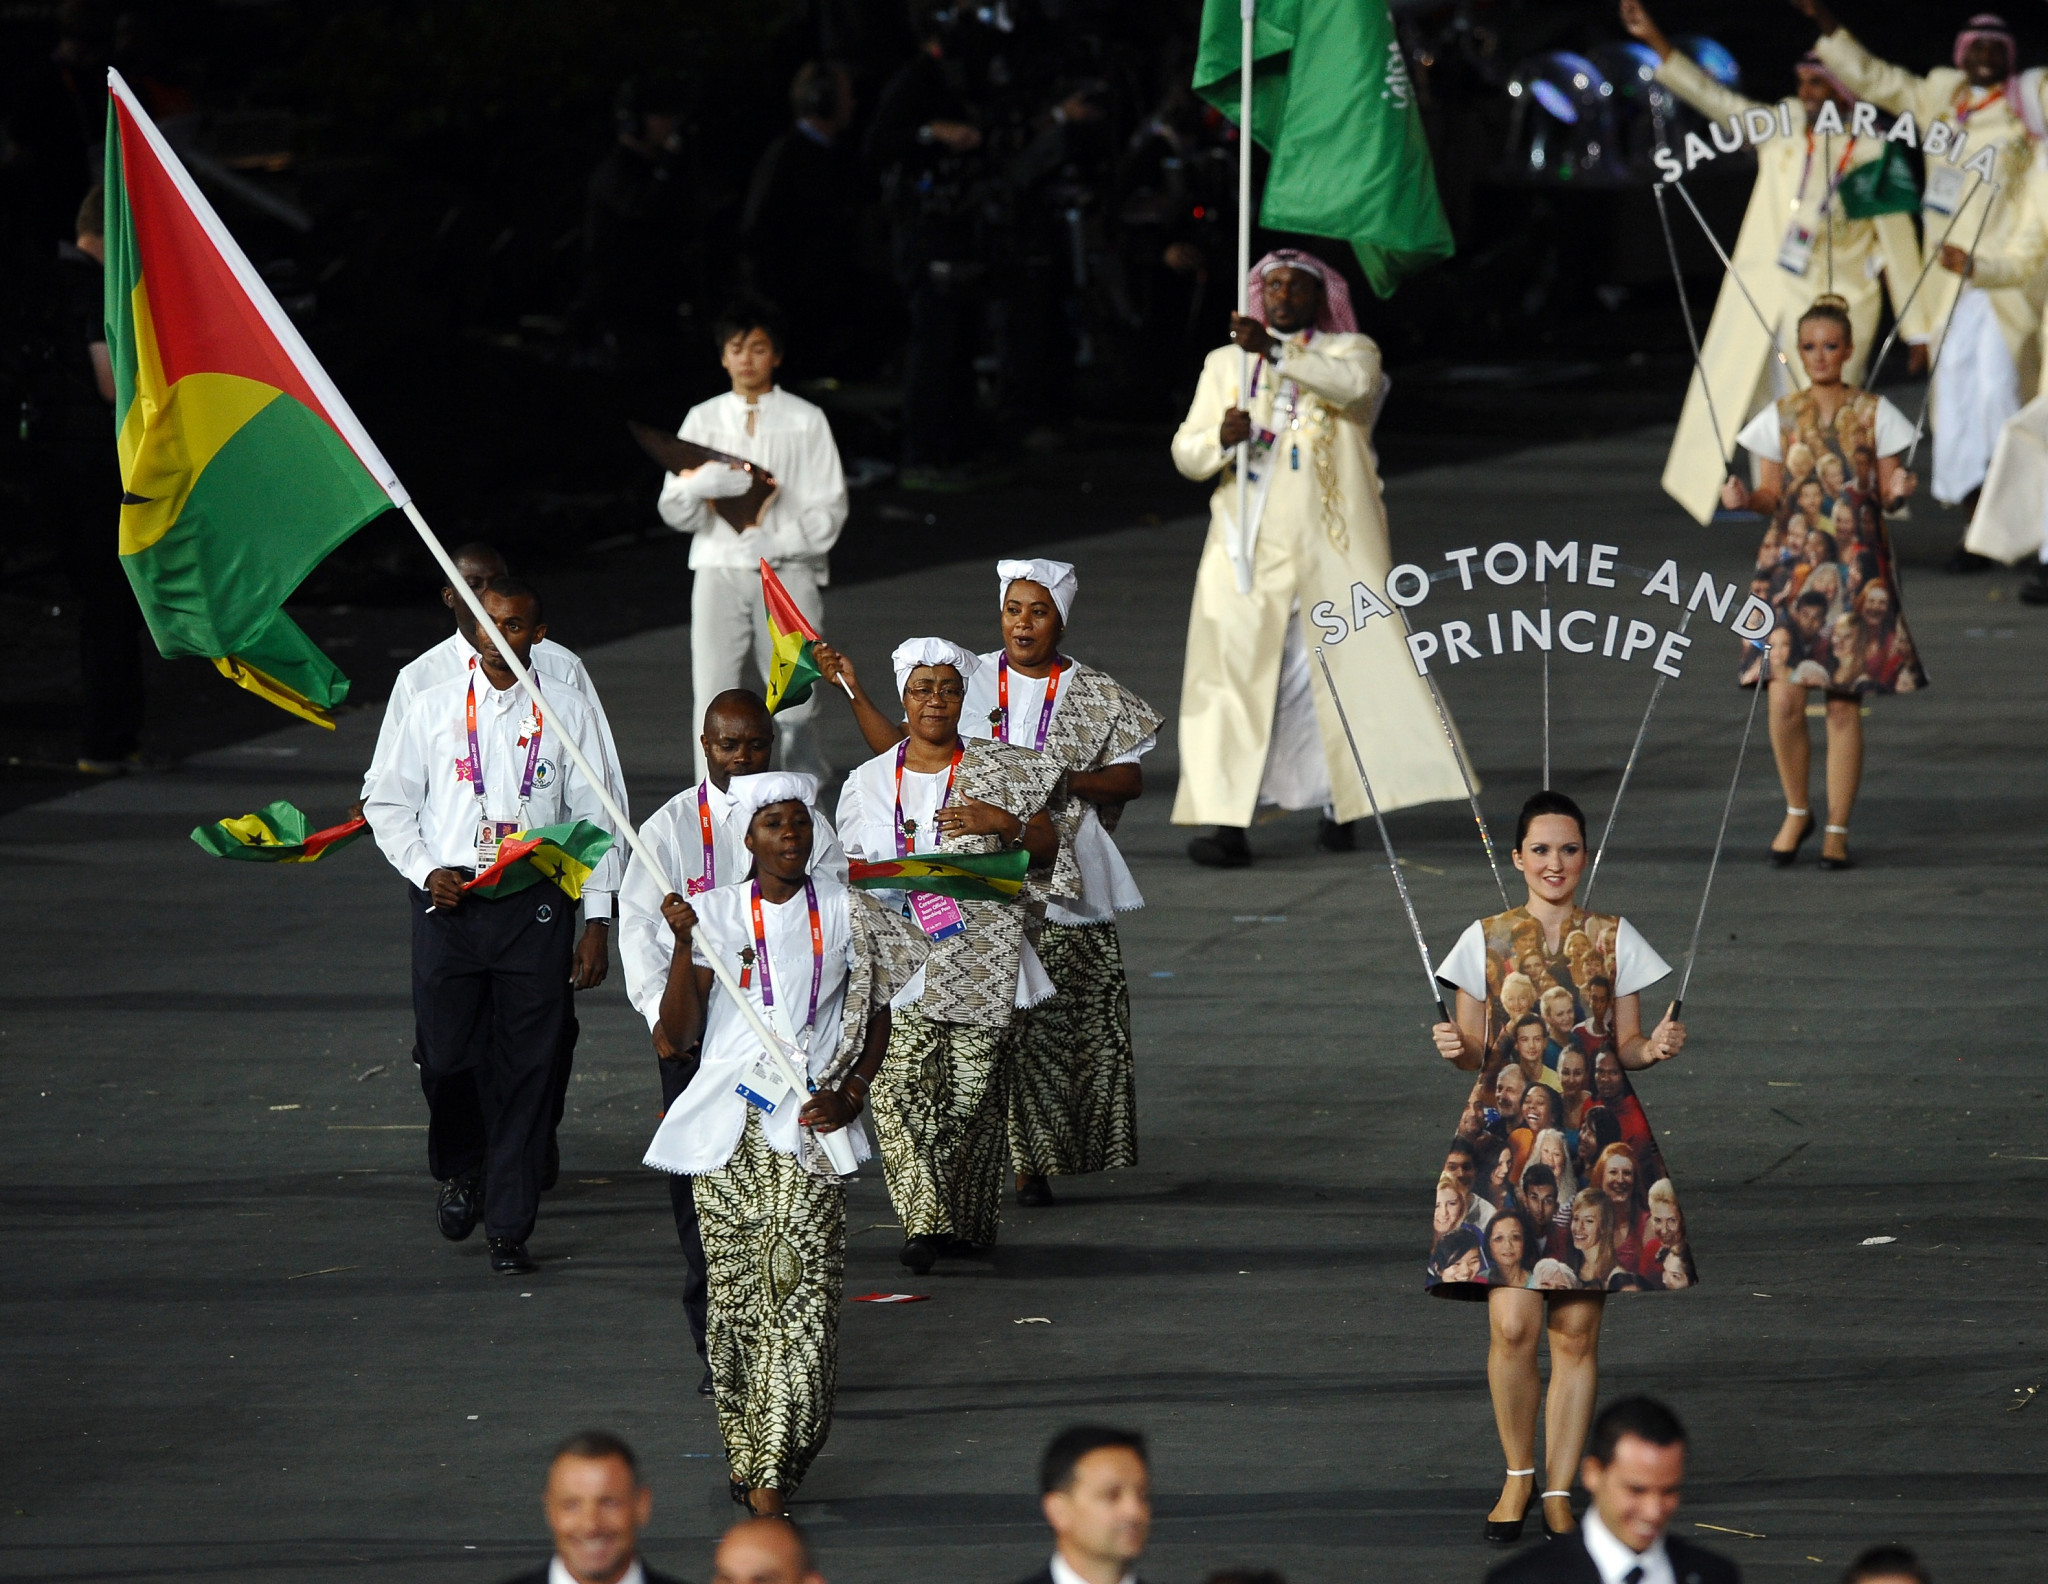 The São Tomé and Príncipe National Olympic Committee celebrated Olympic Day with an environmental theme ©Getty Images